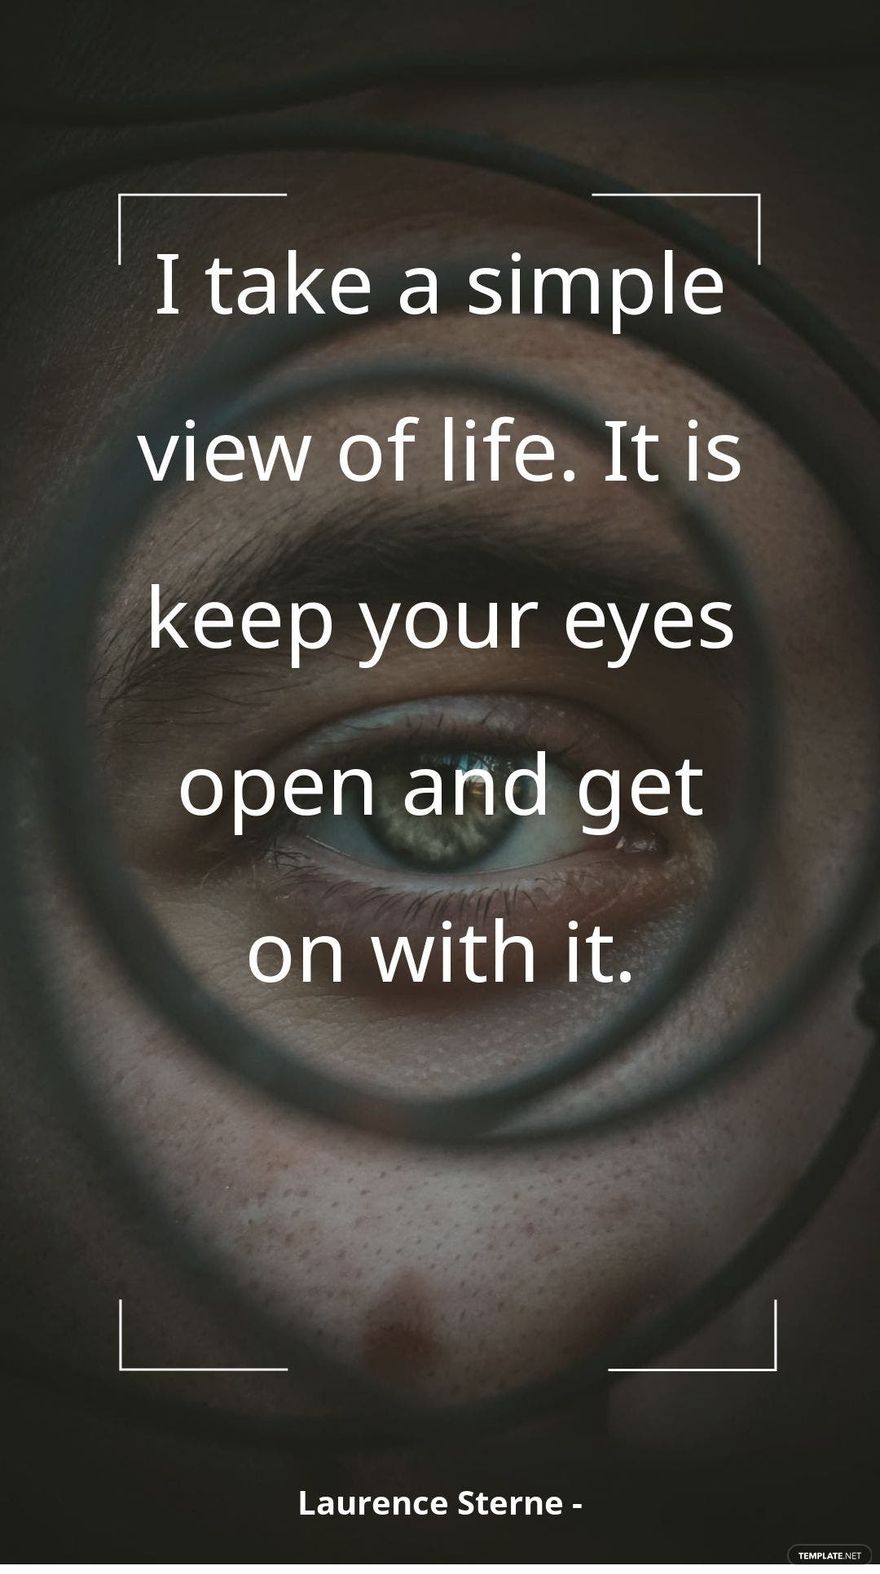 Laurence Sterne - I take a simple view of life. It is keep your eyes open and get on with it.